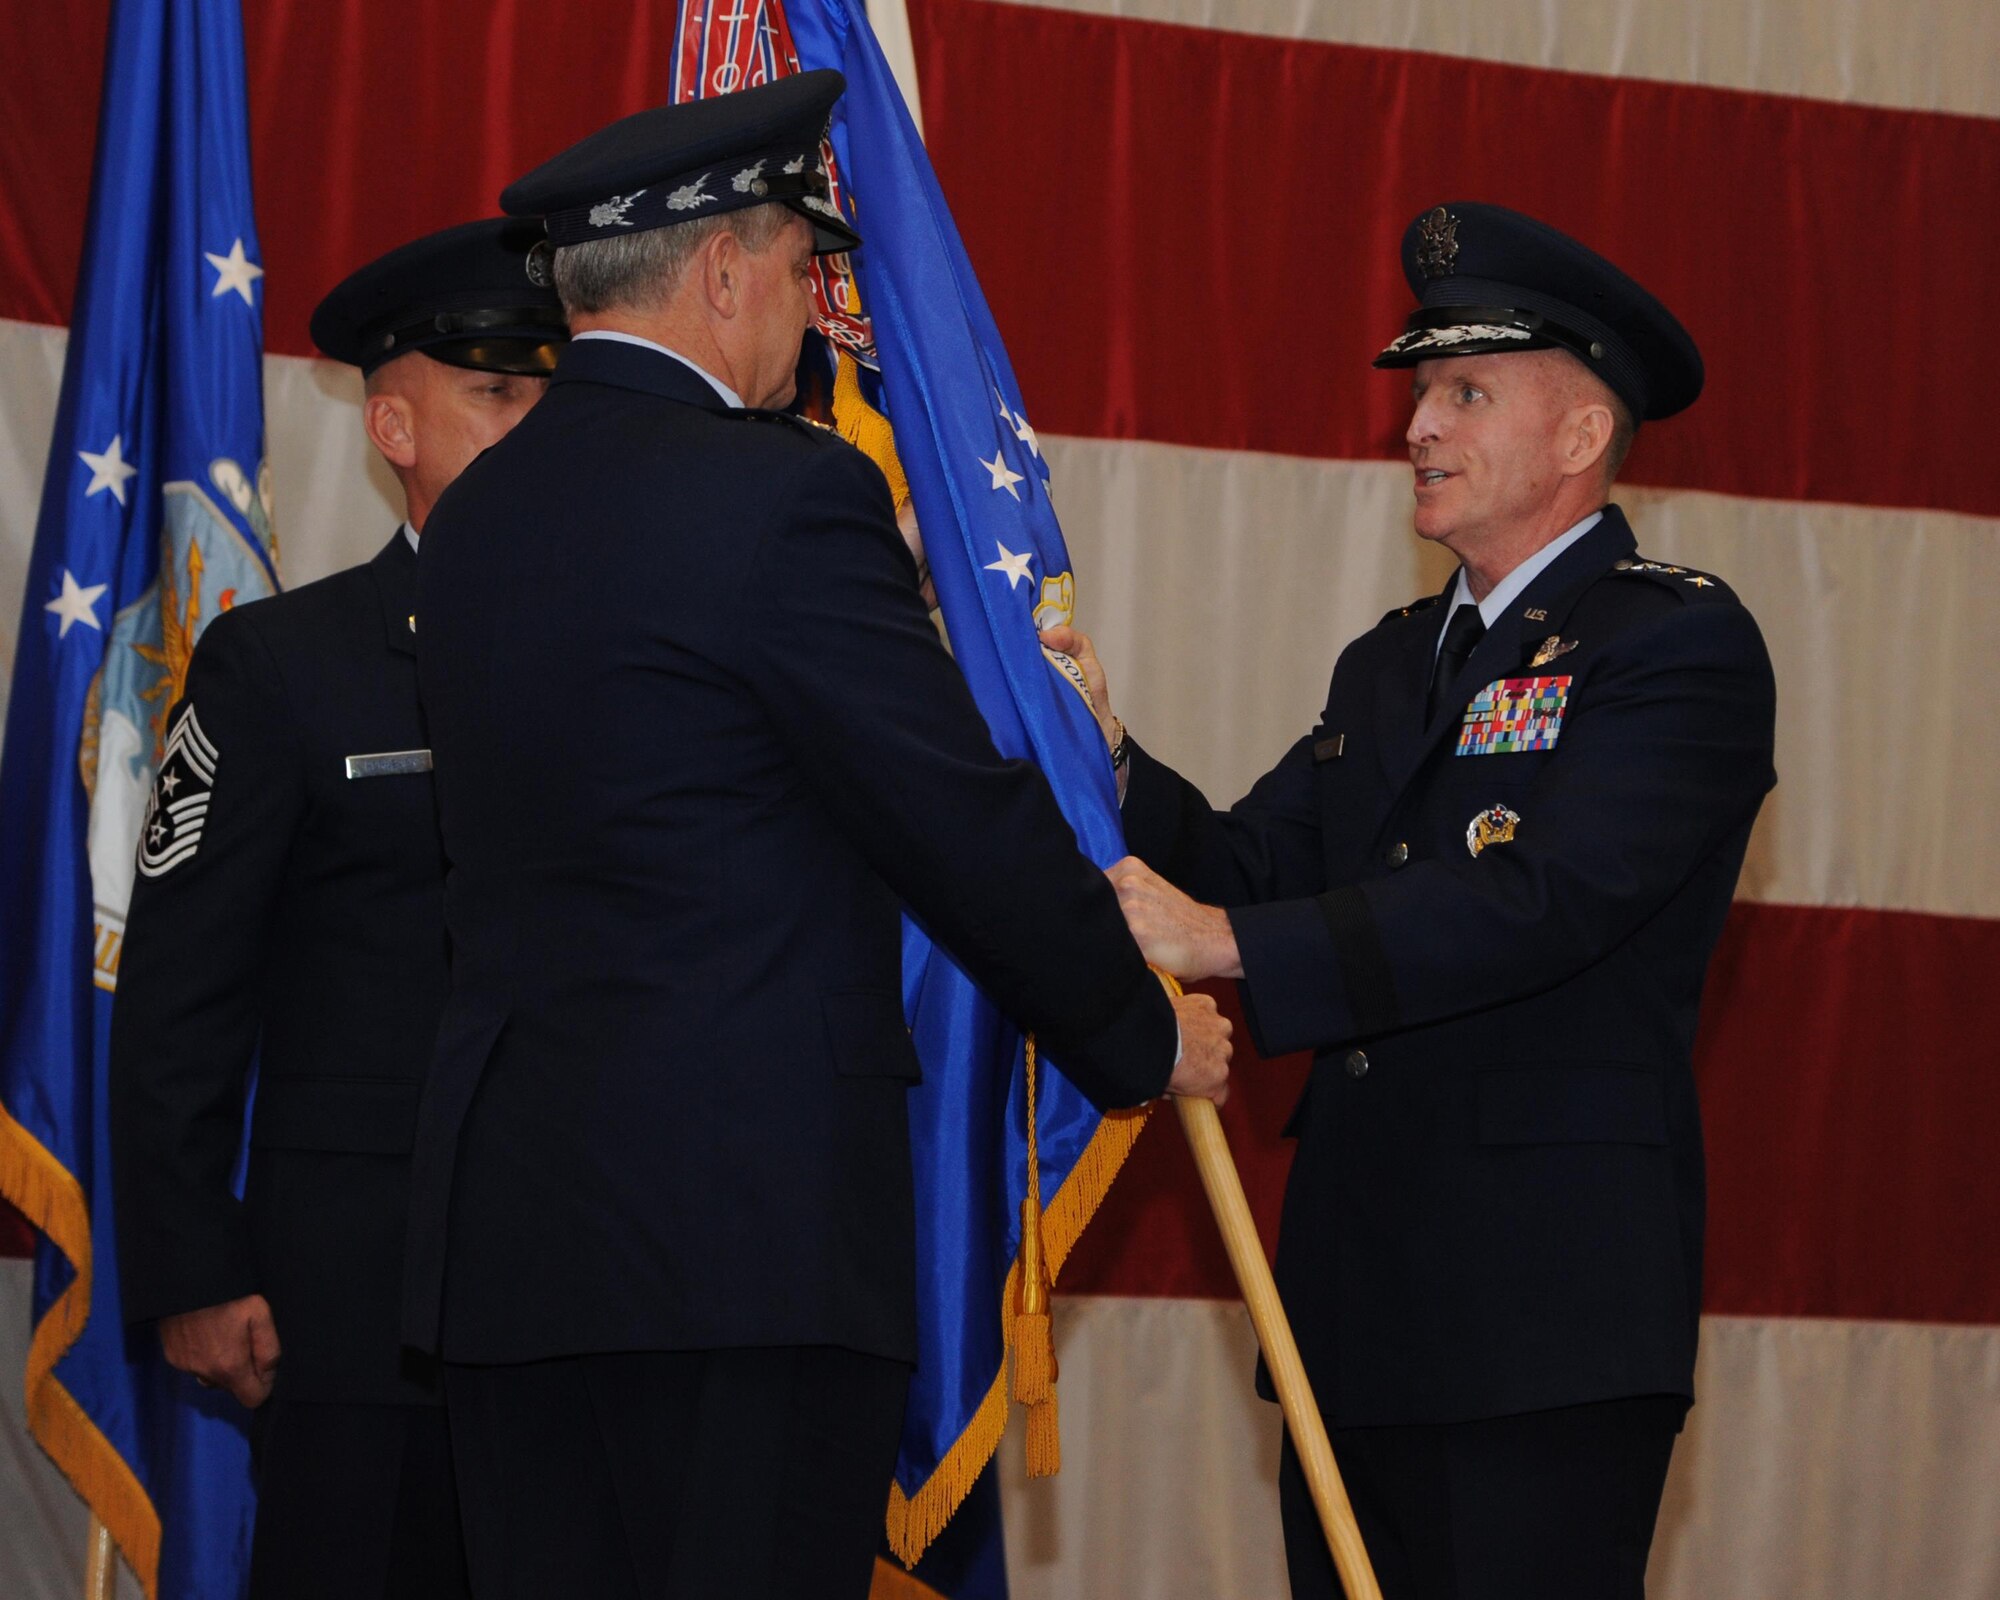 Lt. Gen. Stephen Wilson accepts the Air Force Global Strike Command flag from Air Force Chief of Staff Gen. Mark A. Welsh III during a change of command ceremony at Barksdale Air Force Base, La., Oct. 23, 2013. Global Strike’s mission is to develop and provide combat ready forces for safe, secure, and effective nuclear deterrence and global strike operations to support the President of the United States and combatant commanders. 